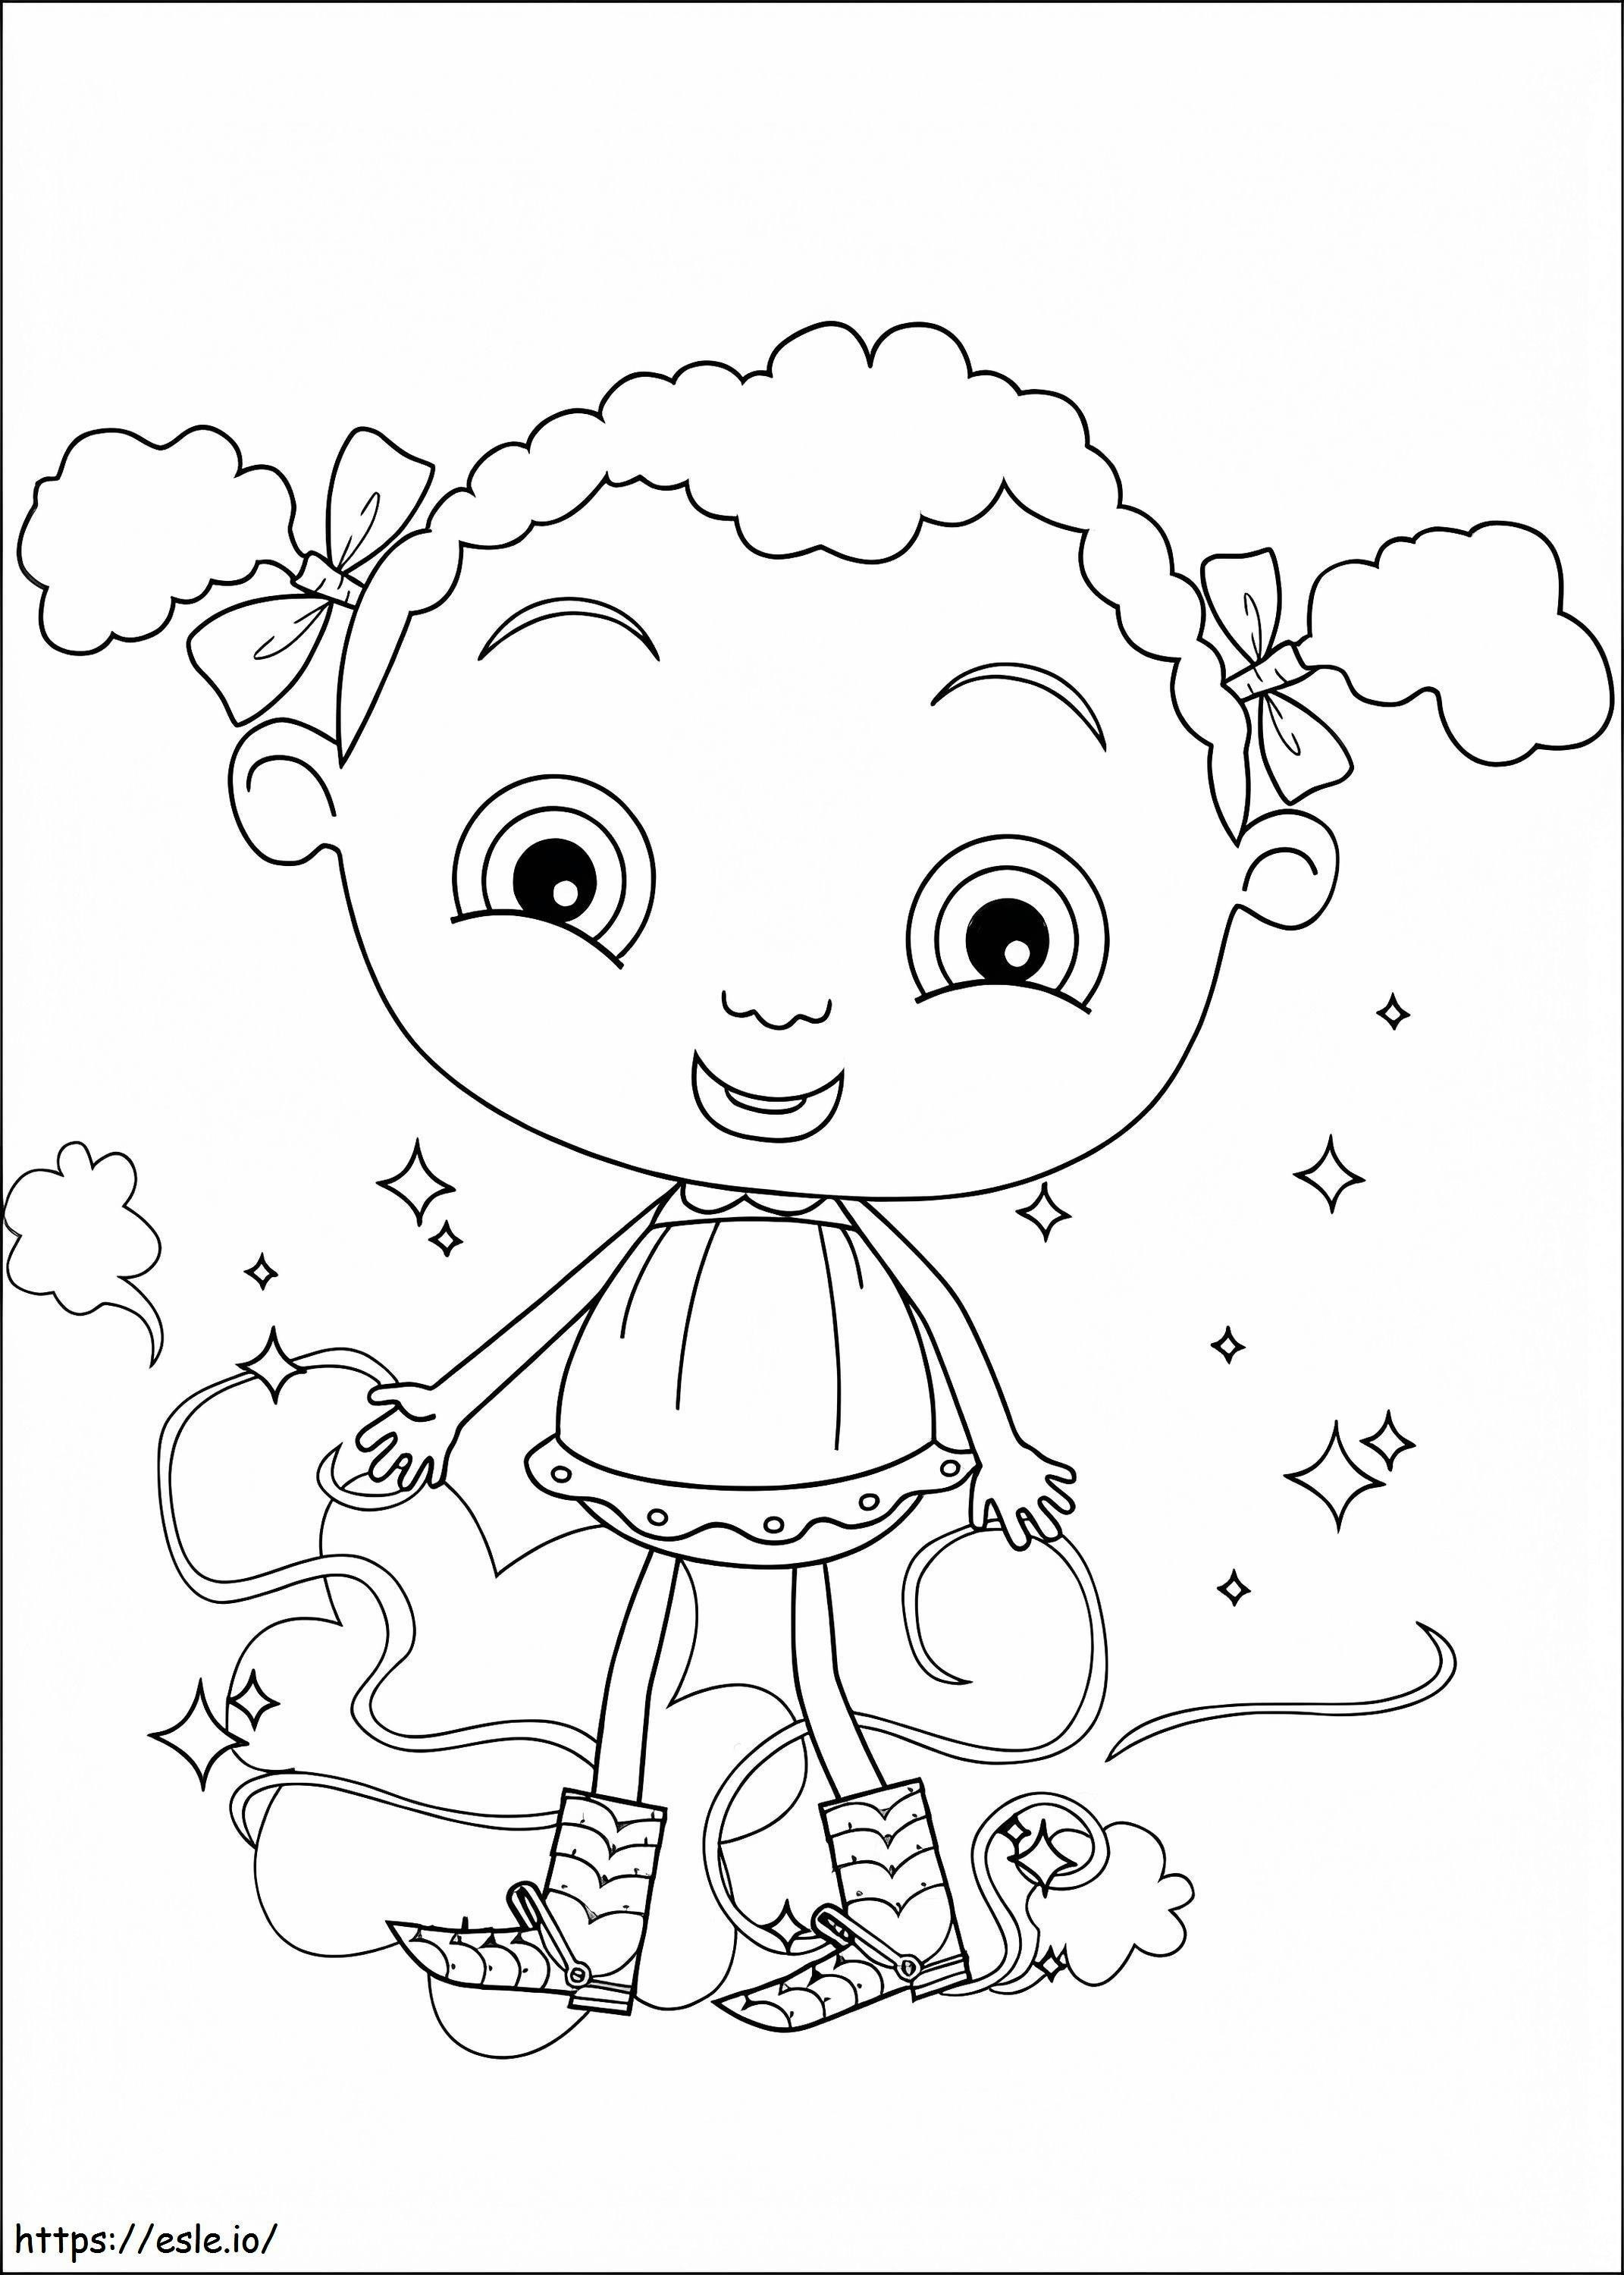 Adorable Franny coloring page